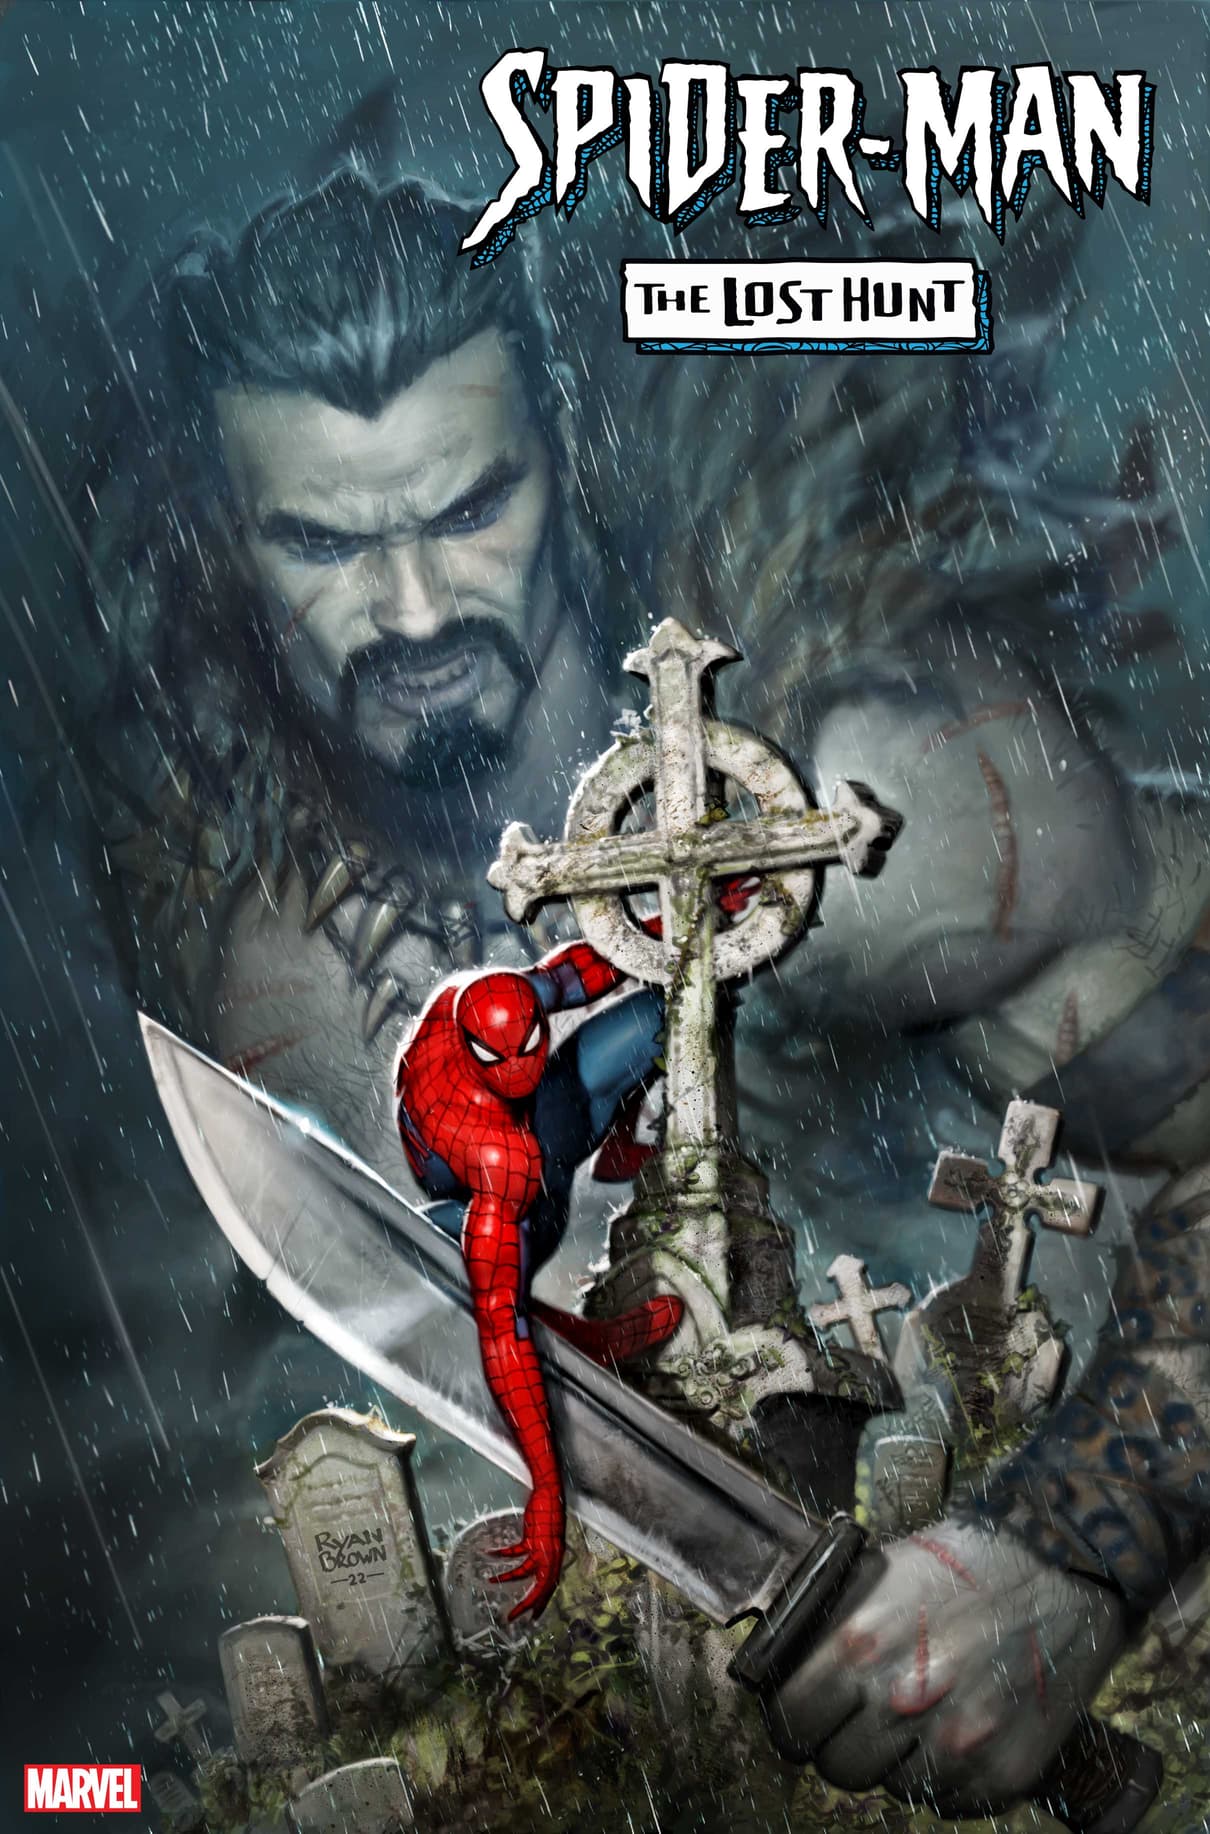 SPIDER-MAN: THE LOST HUNT #1 cover by Ryan Brown